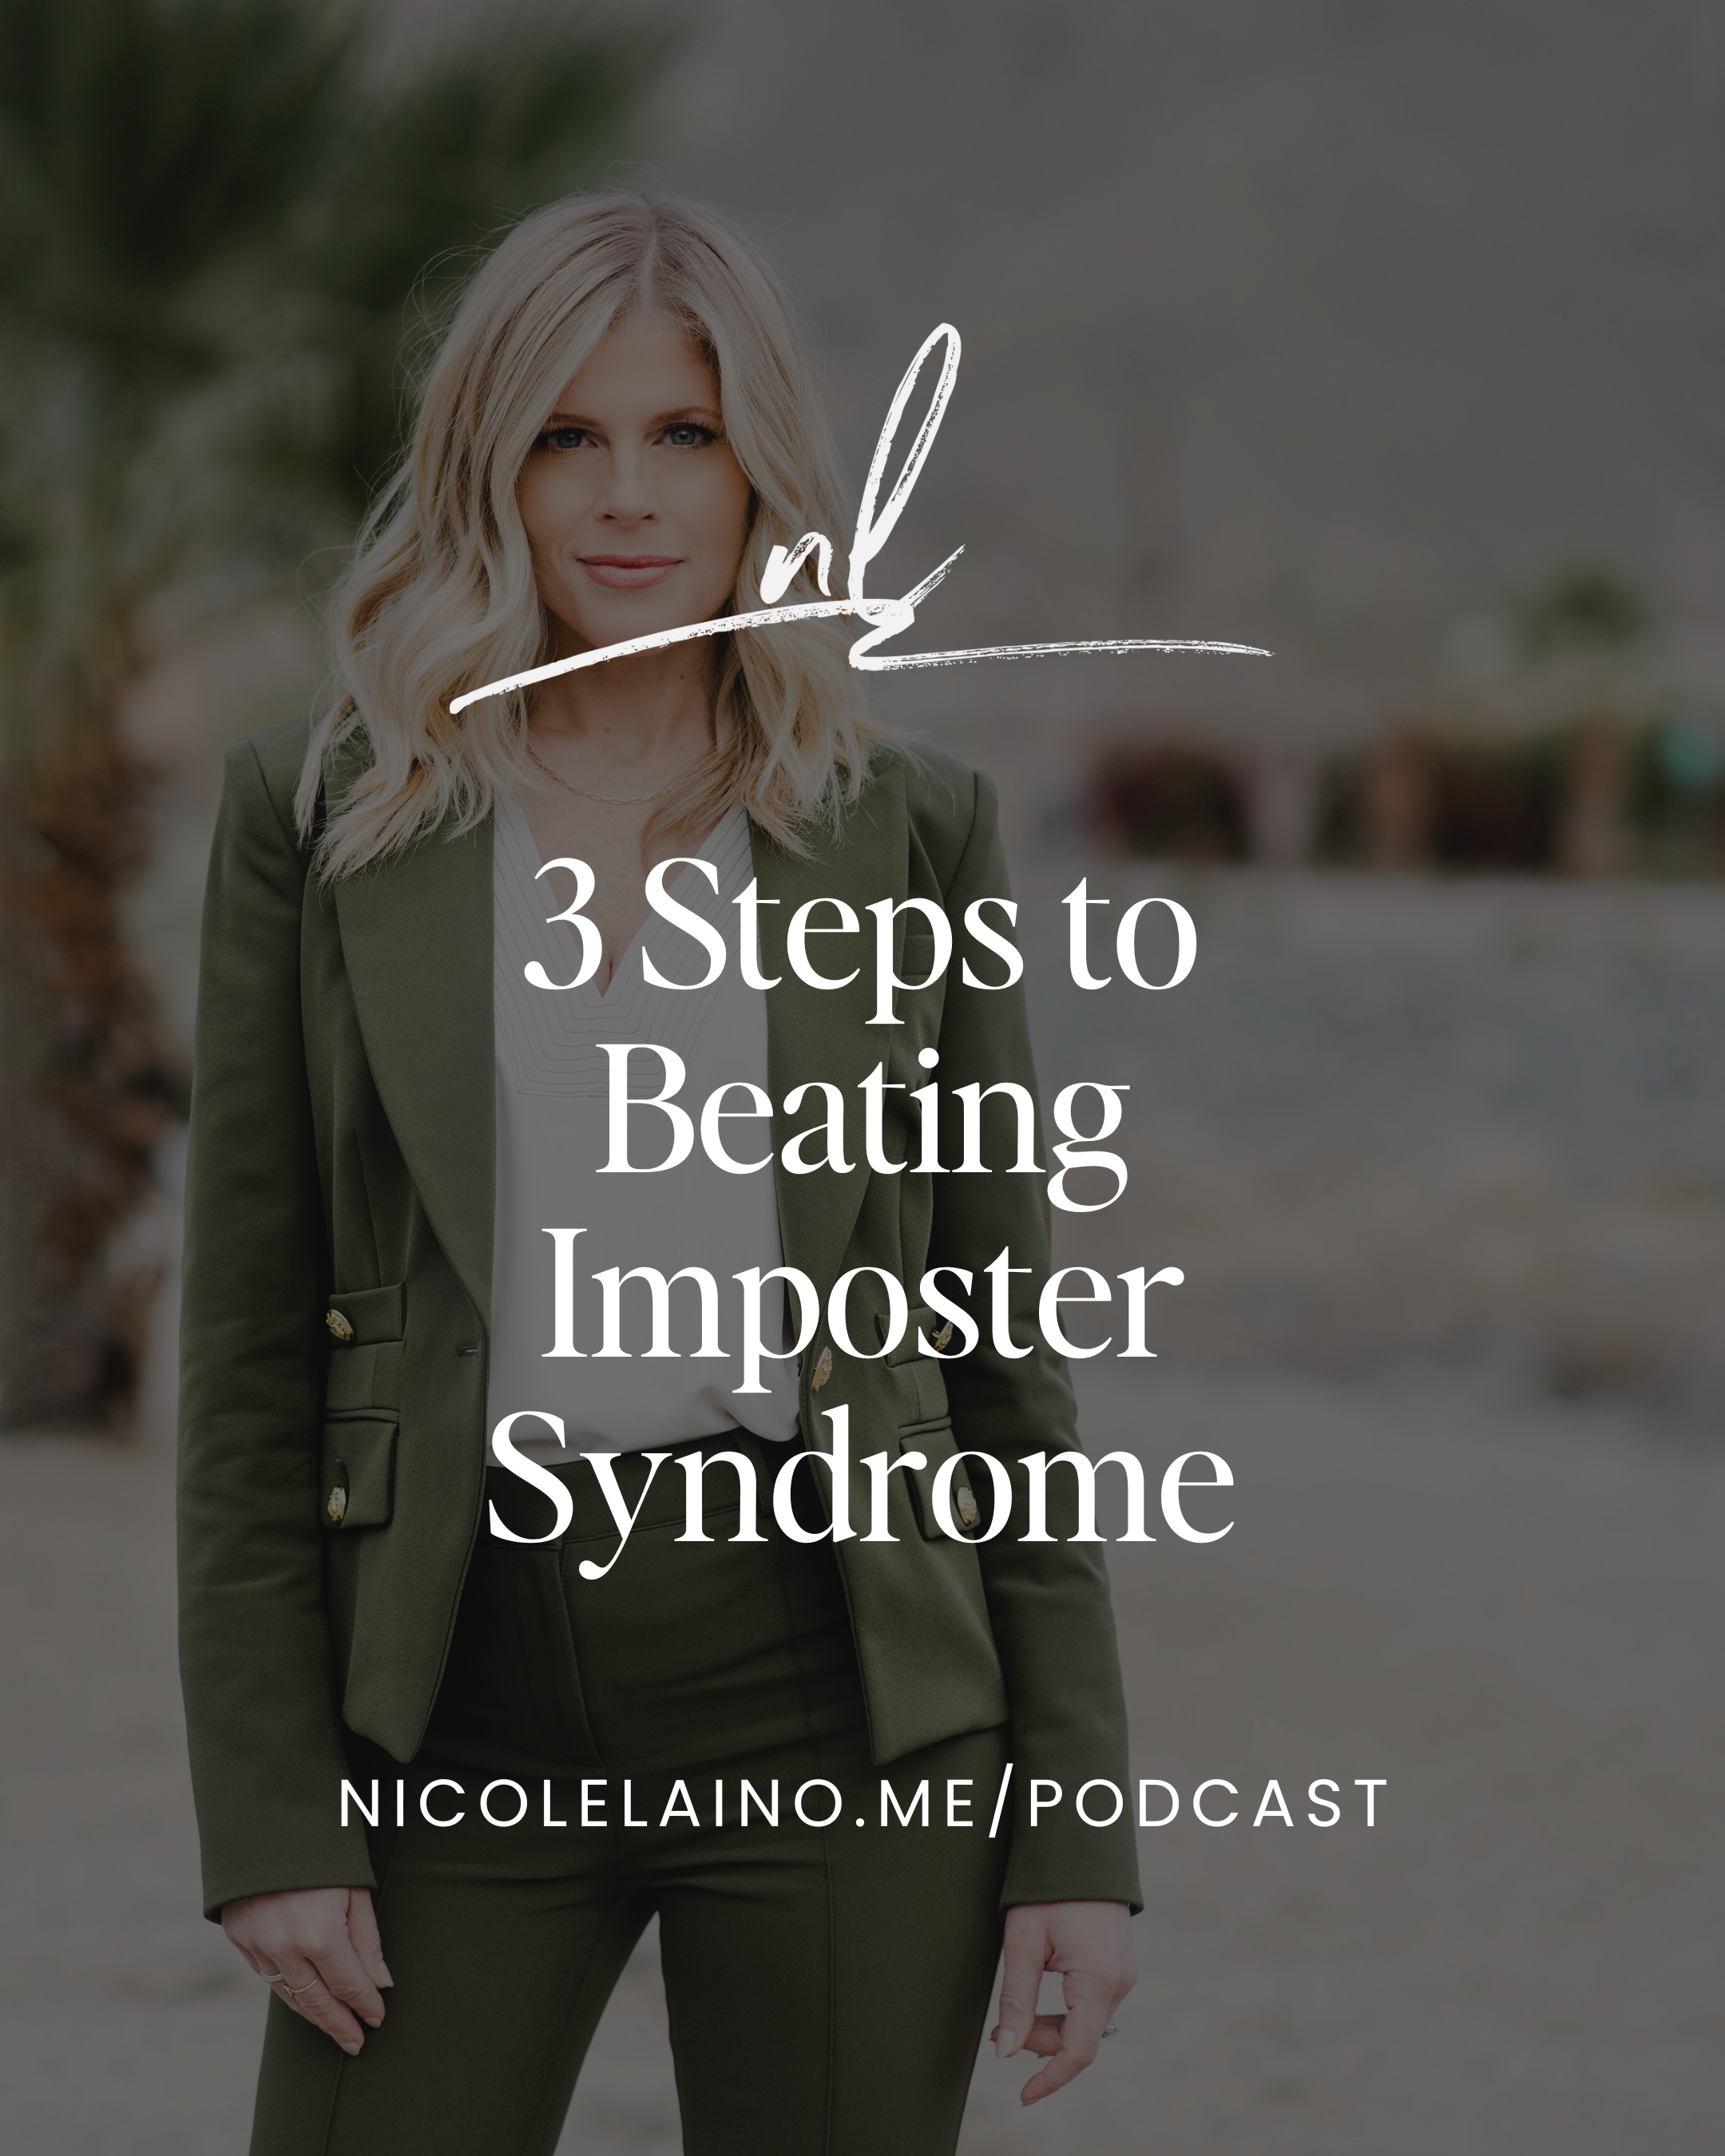 3 Steps to Beating Imposter Syndrome